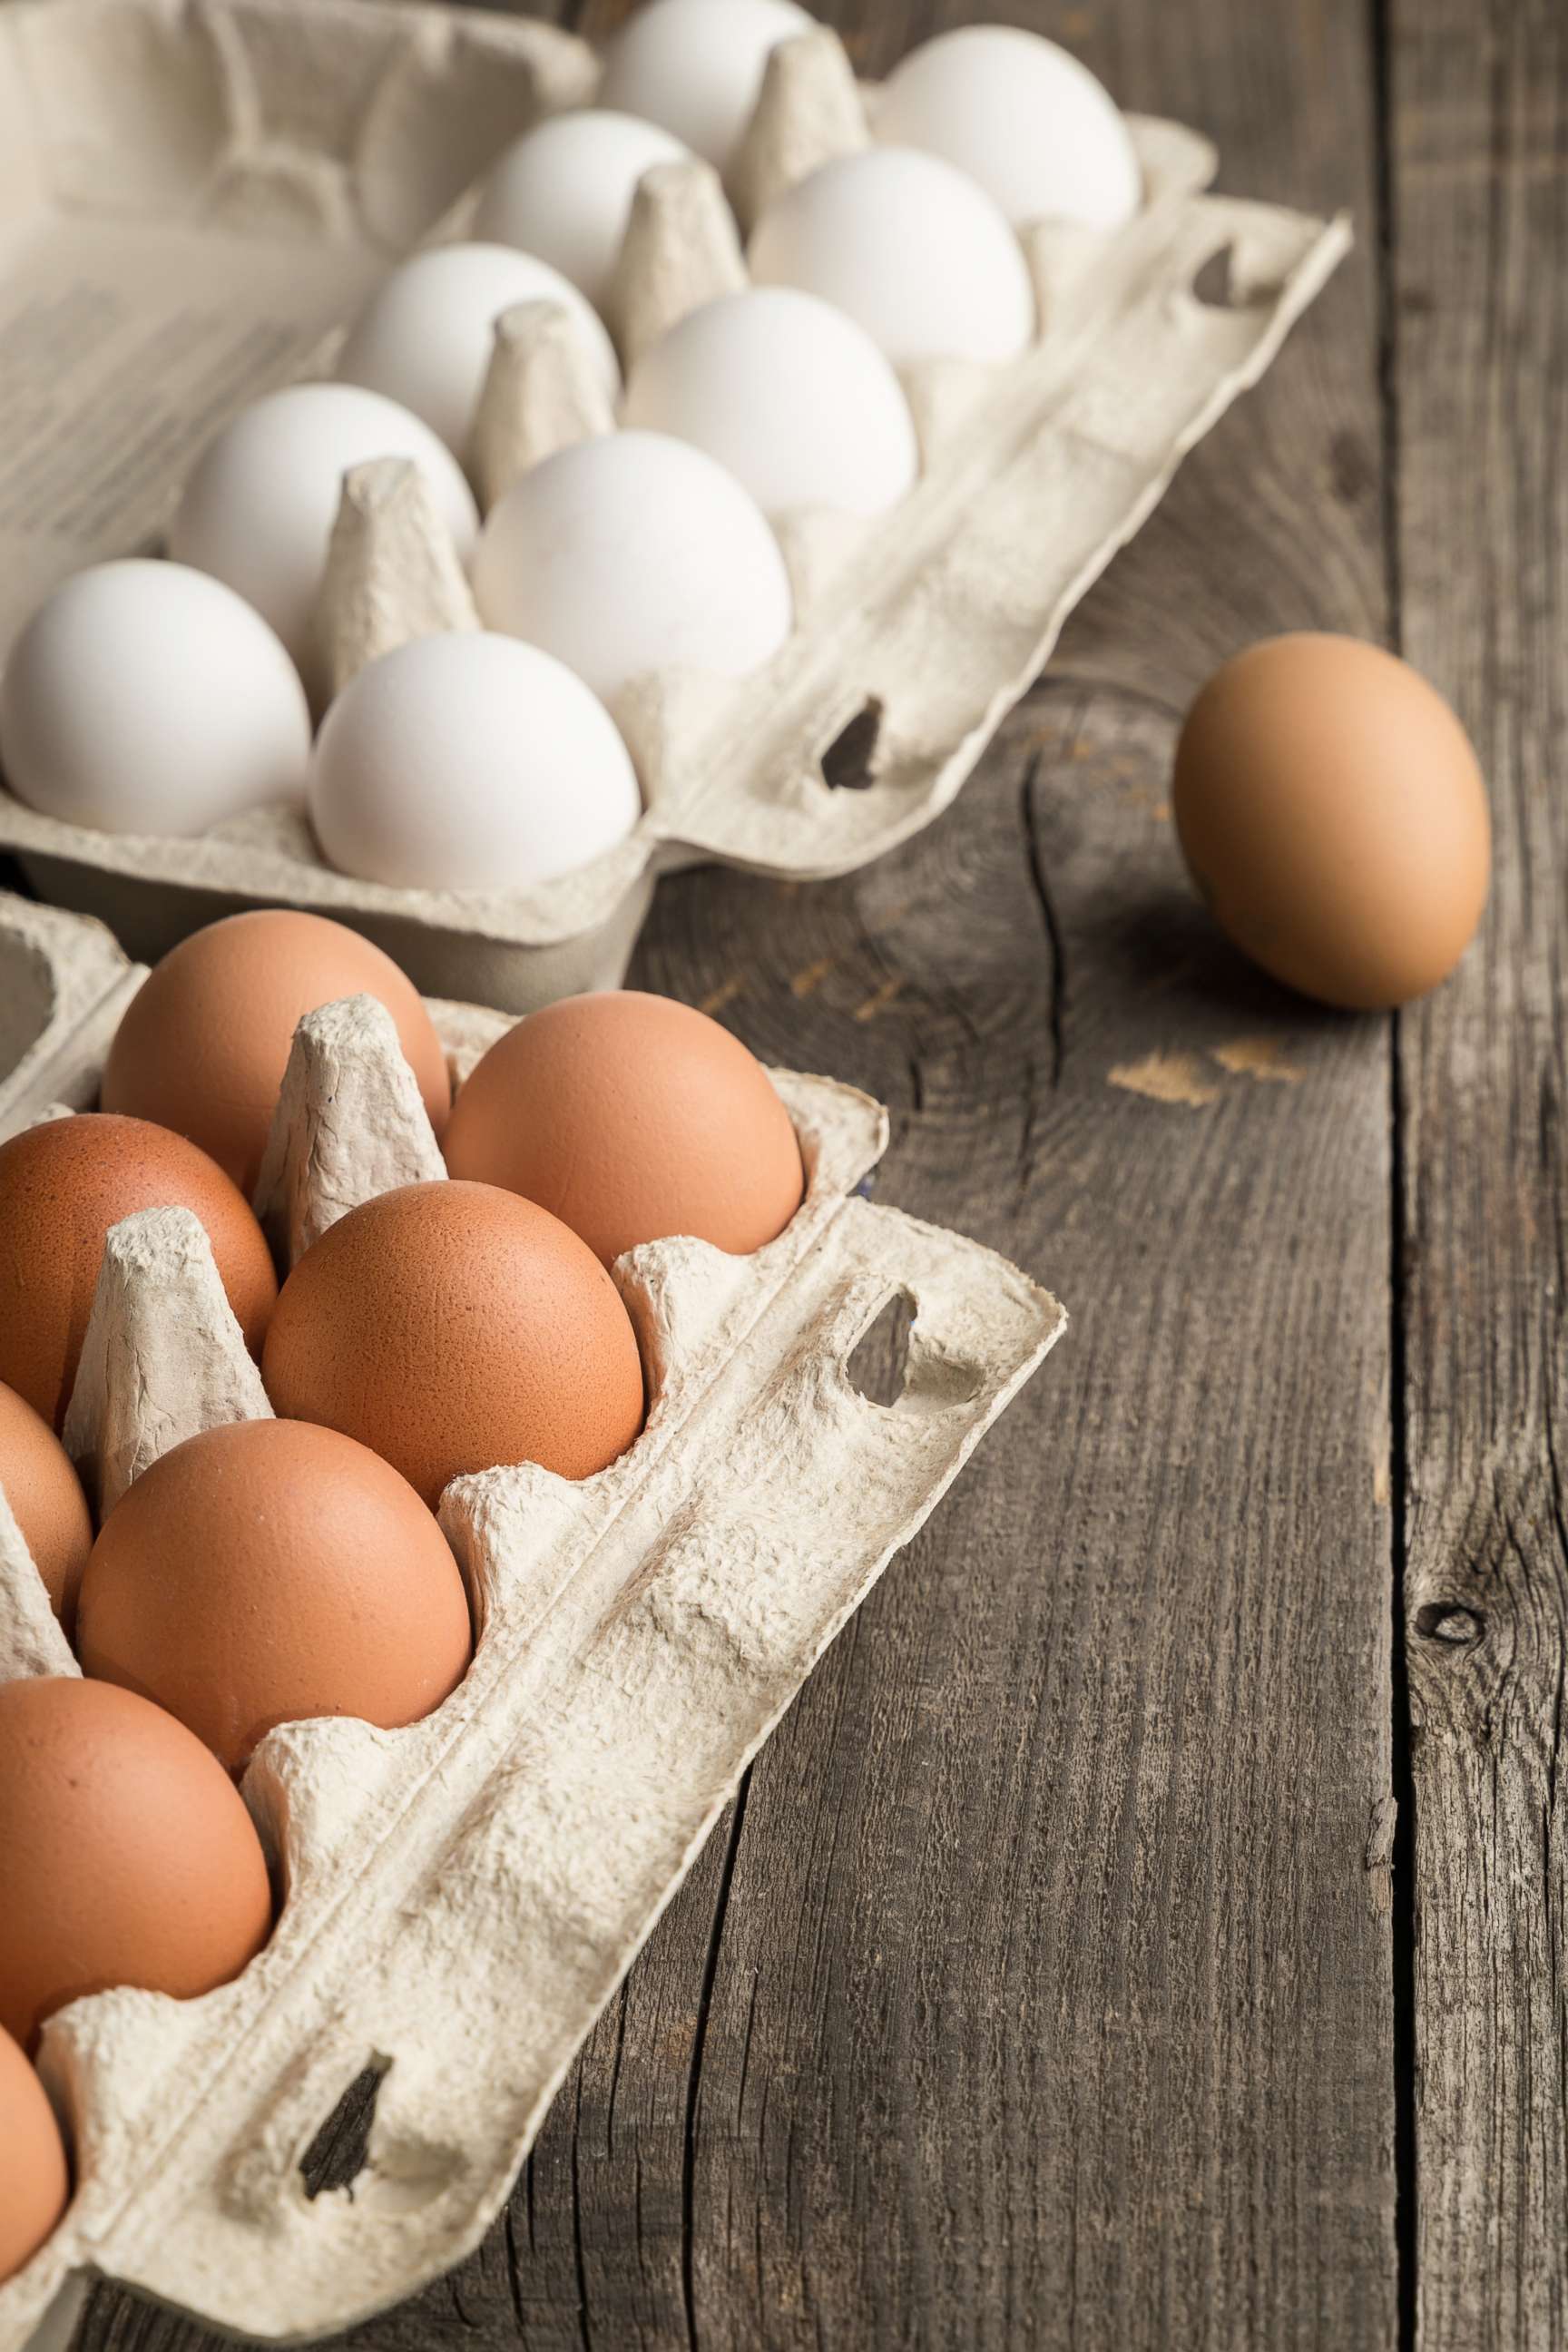 PHOTO: Eggs are seen in box container on a wooden table in this stock photo.